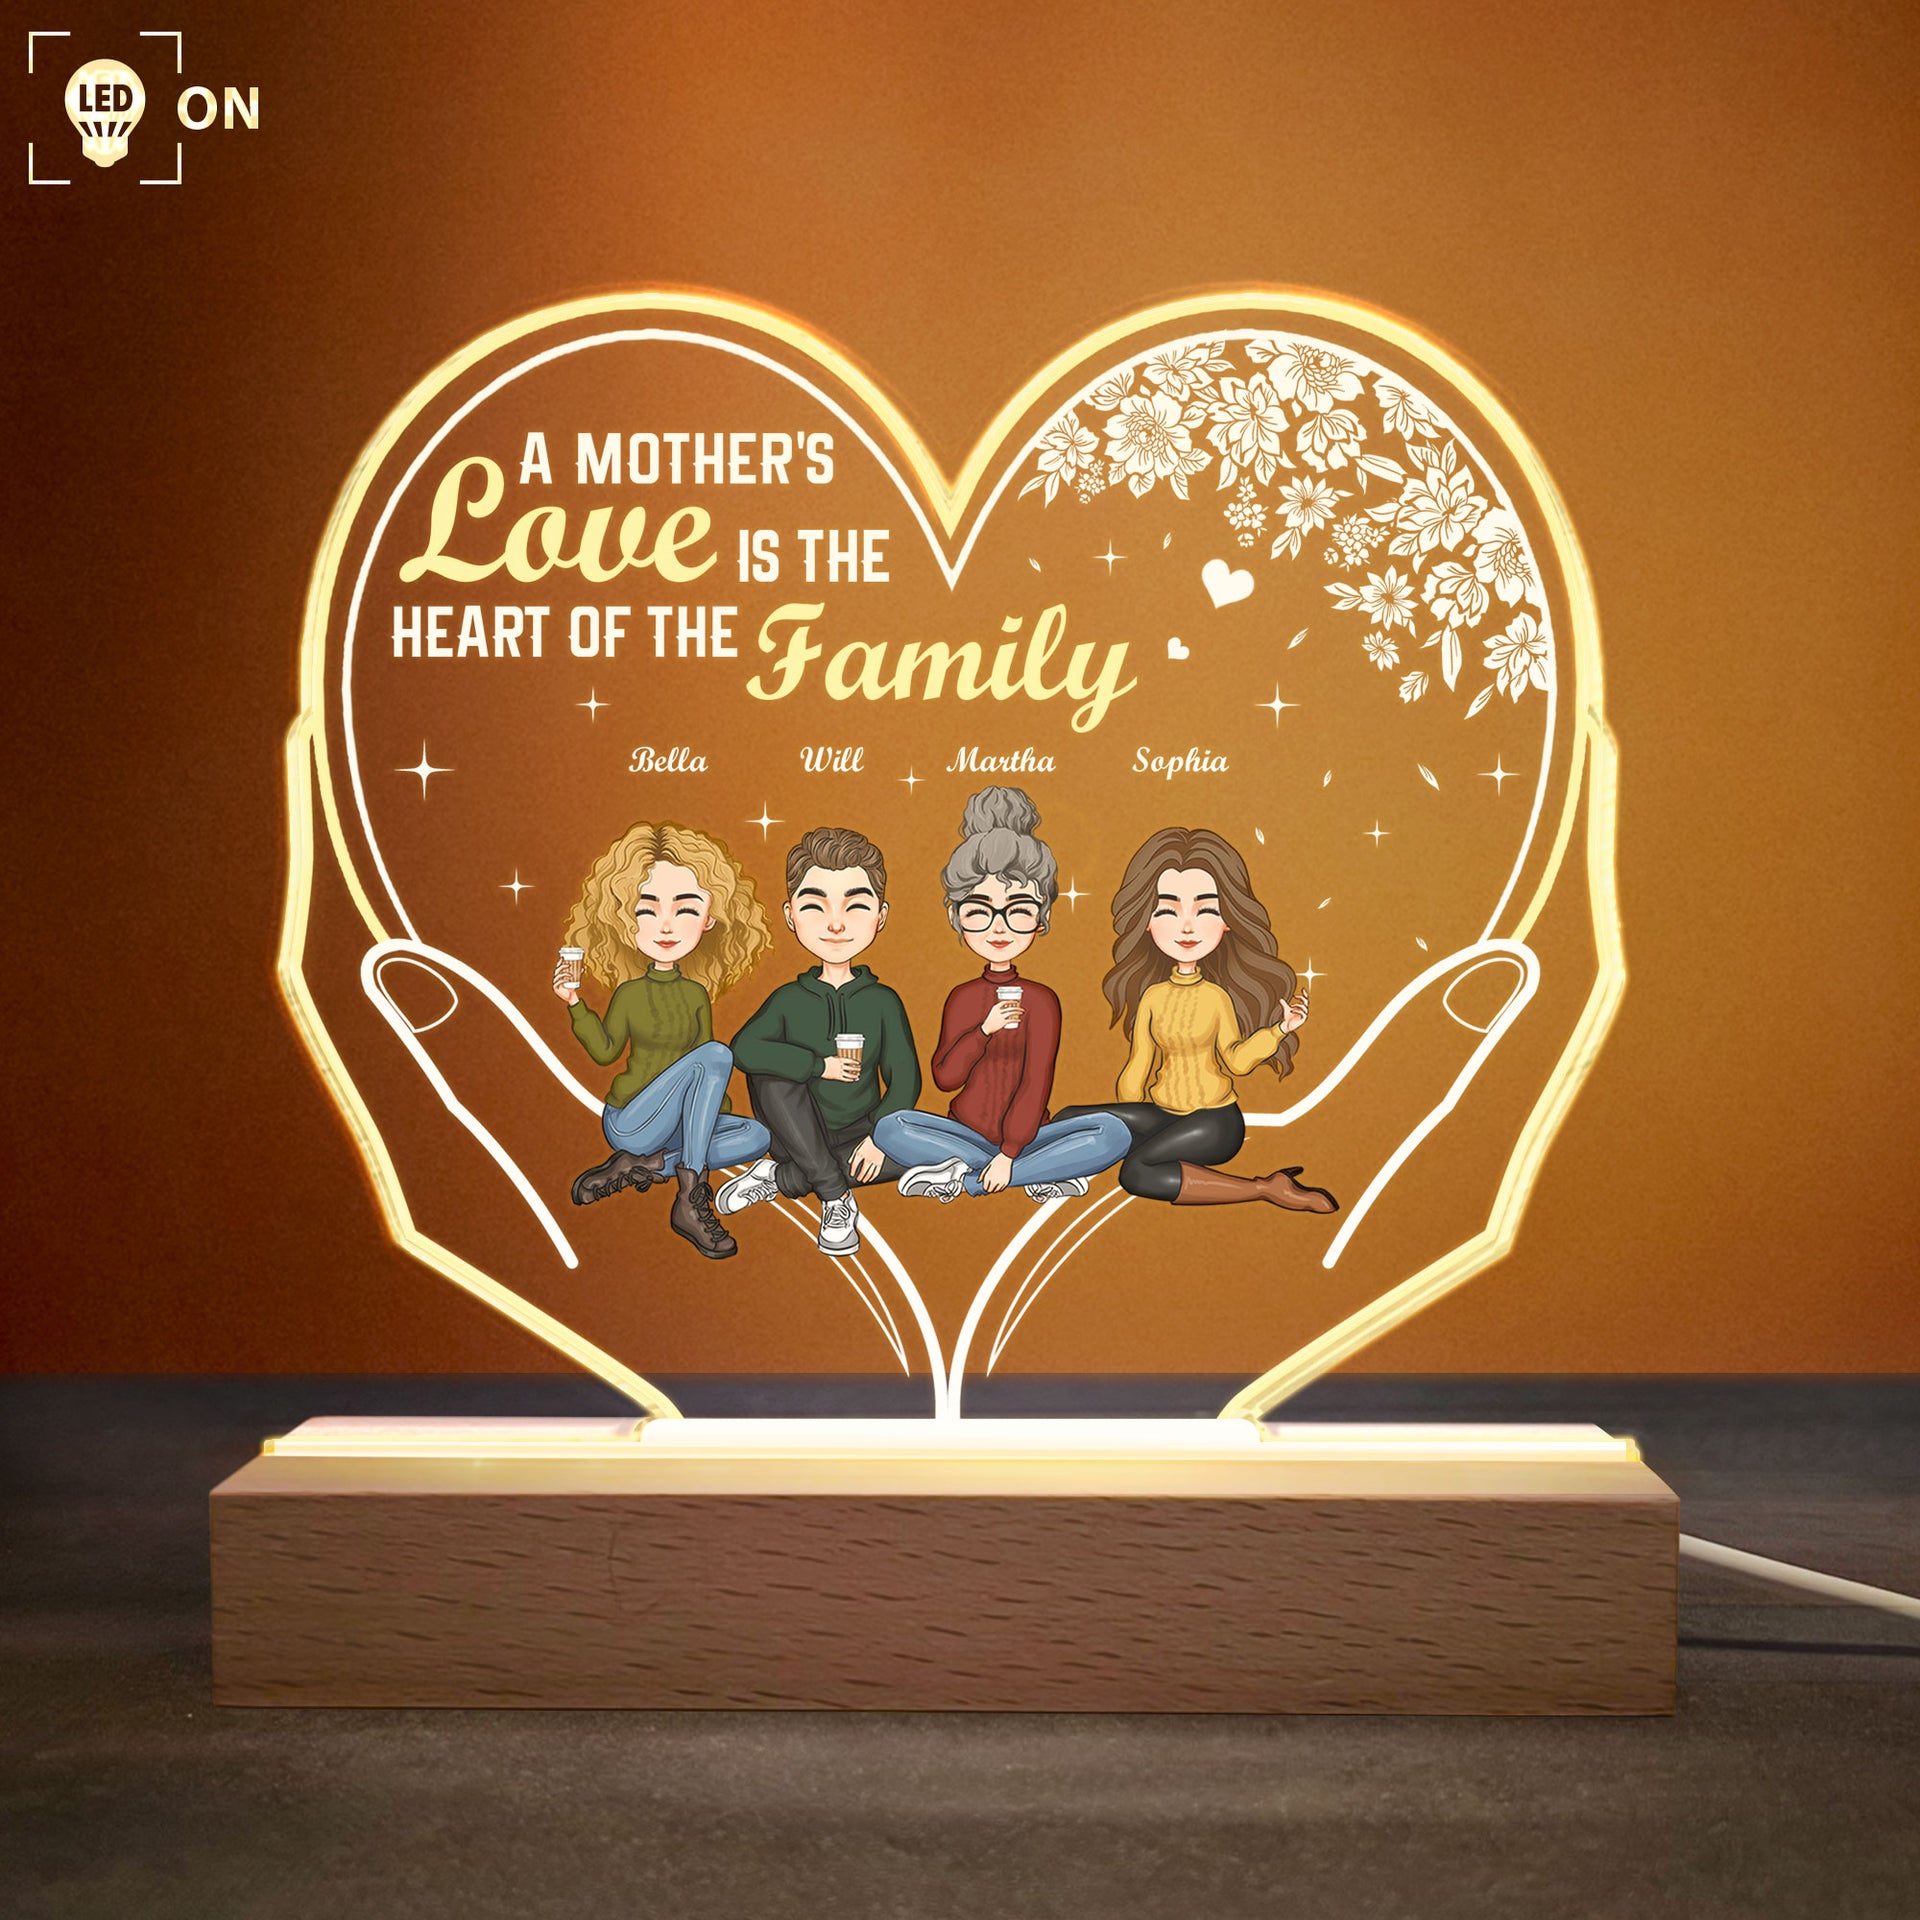 https://macorner.co/cdn/shop/products/A-MotherS-Love-Is-The-Heart-Of-The-Family-Personalized-3D-LED-Light-Wooden-Base-MotherS-Day-Birthday-Gift-For-Mom-Mother2.jpg?v=1676884240&width=1920